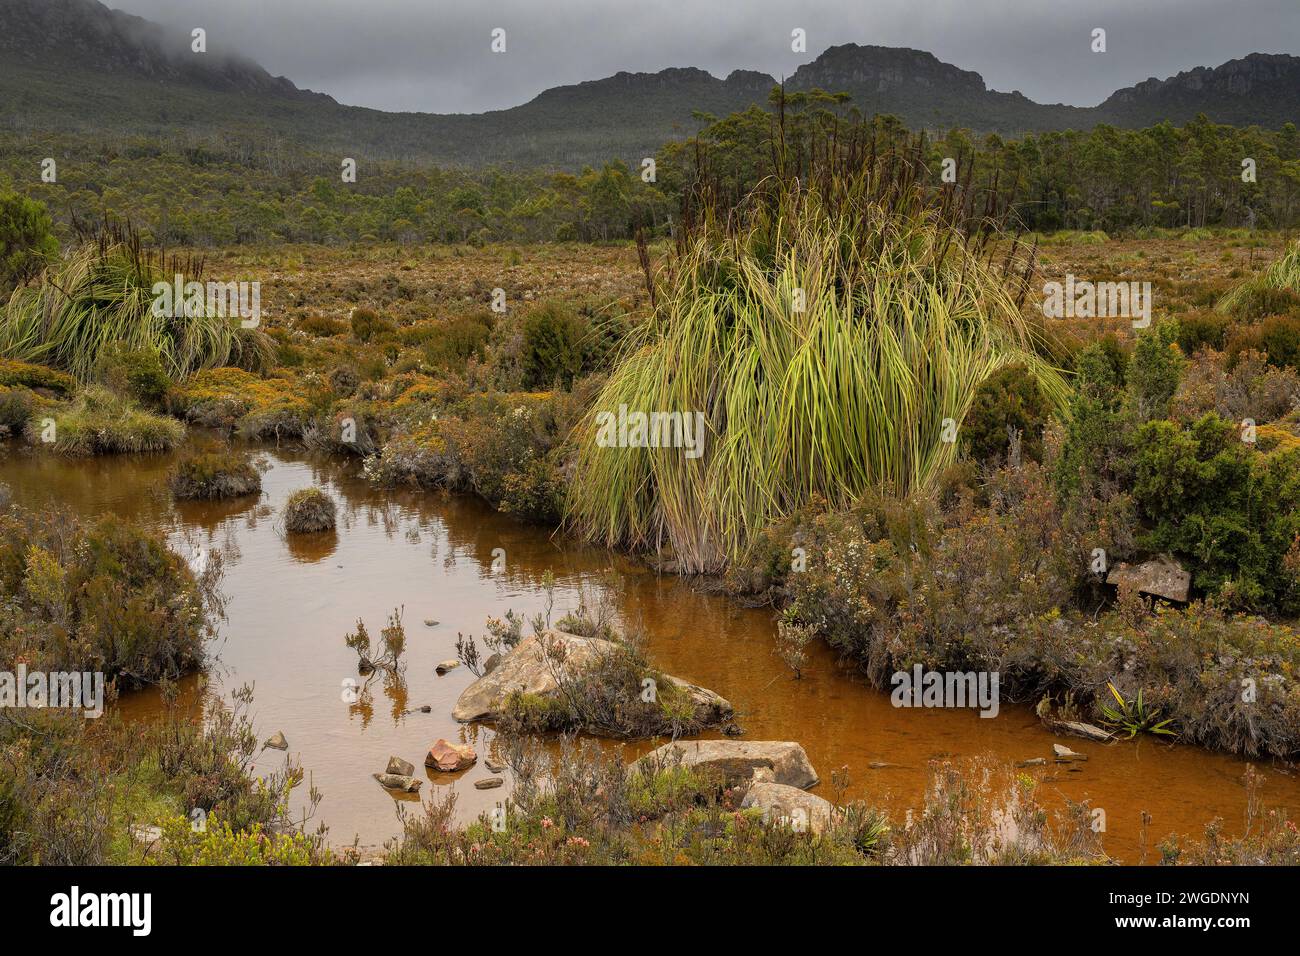 Bog and streams on the lower slope of Hartz peak, with Cutting Grass, Gahnia grandis, and many other species; Hartz Mountains National Park,Tasmania. Stock Photo